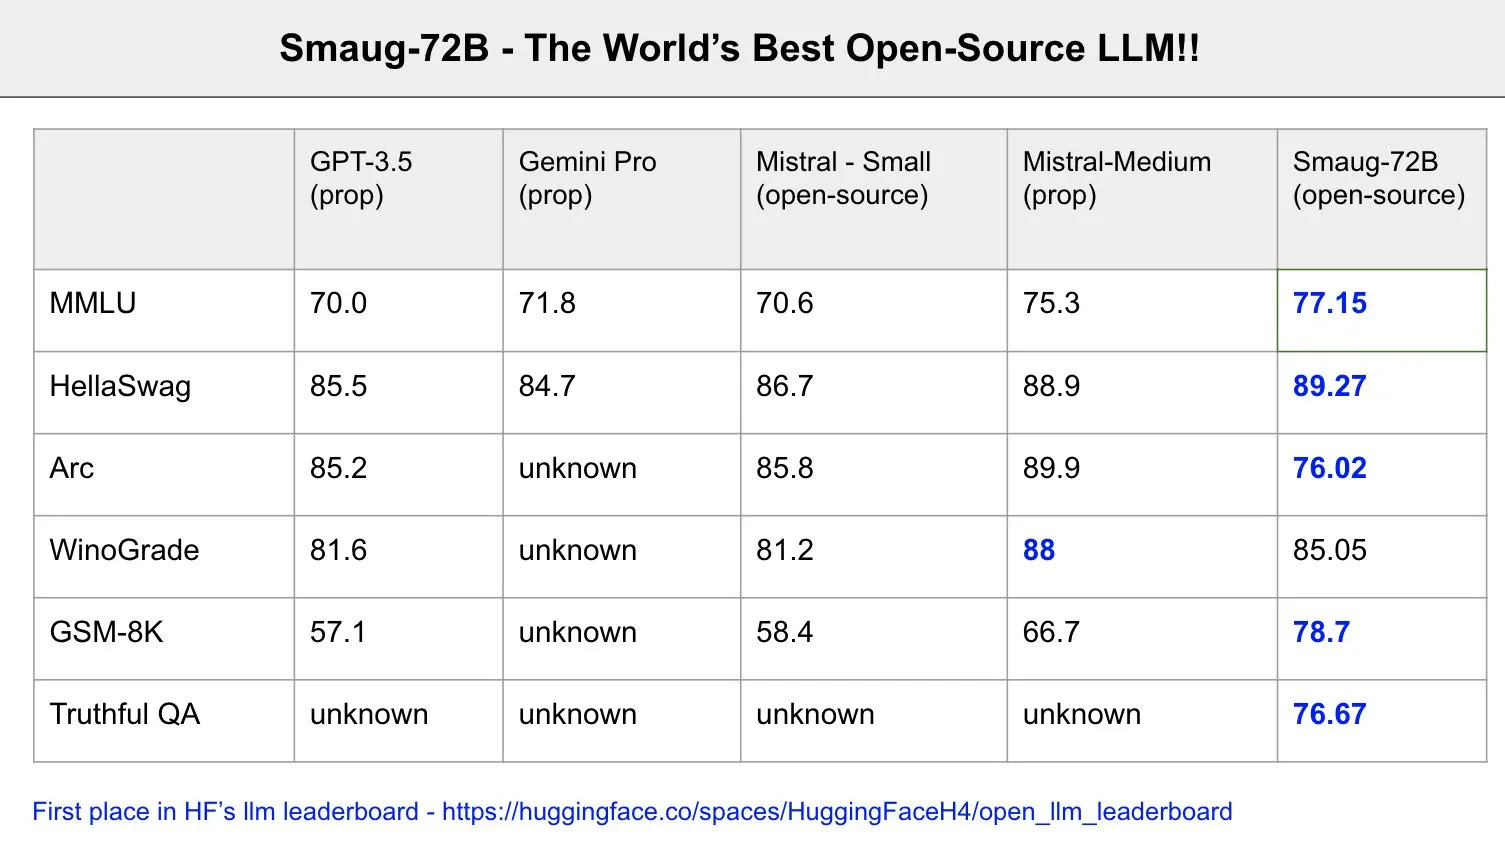  Smaug-72B: The king of open-source AI is here!